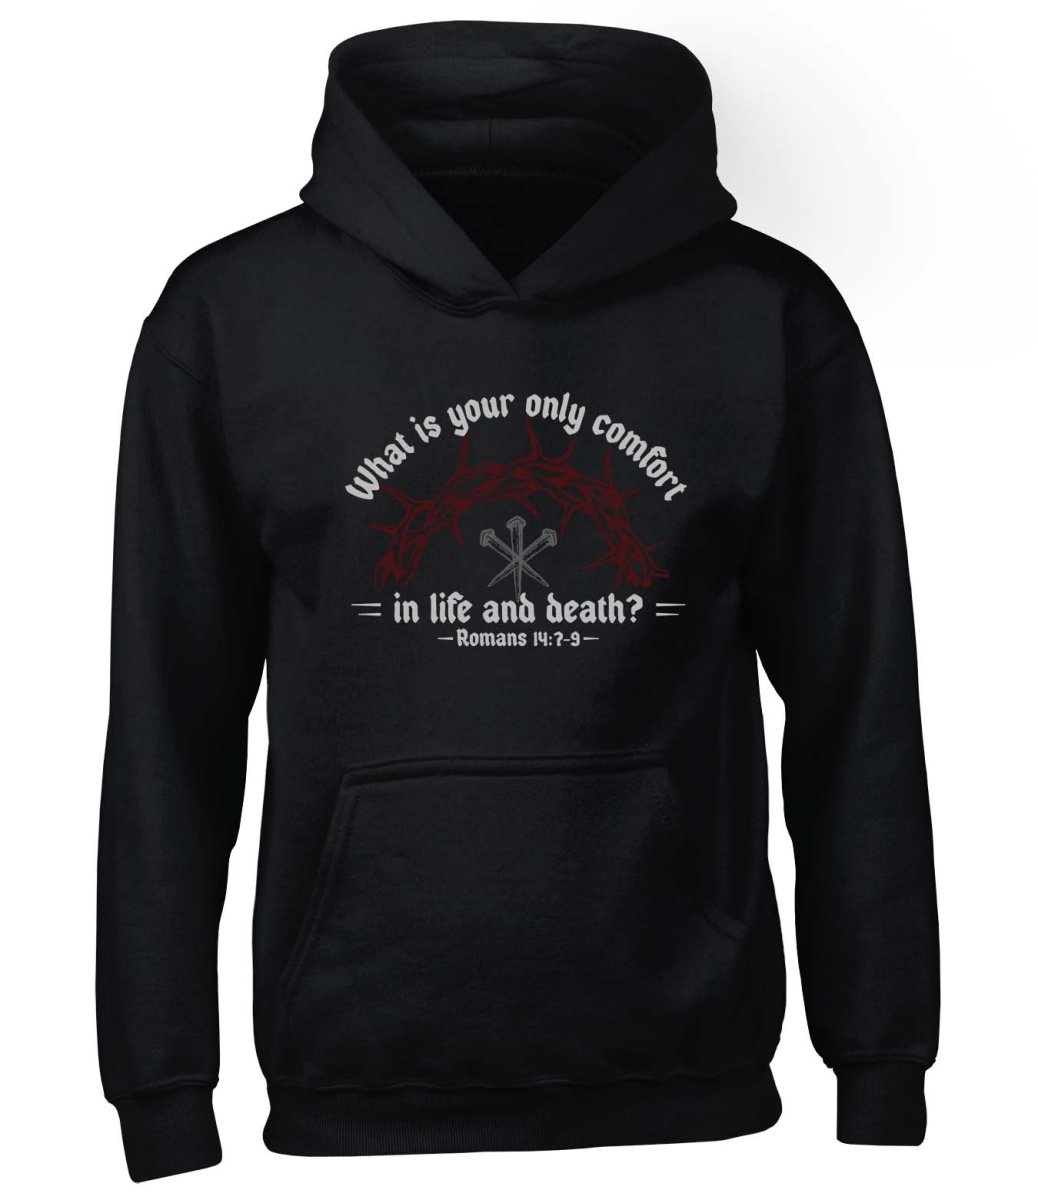 Hoodie - Life & Death - Hoodie - The Reformed Sage - #reformed# - #reformed_gifts# - #christian_gifts#